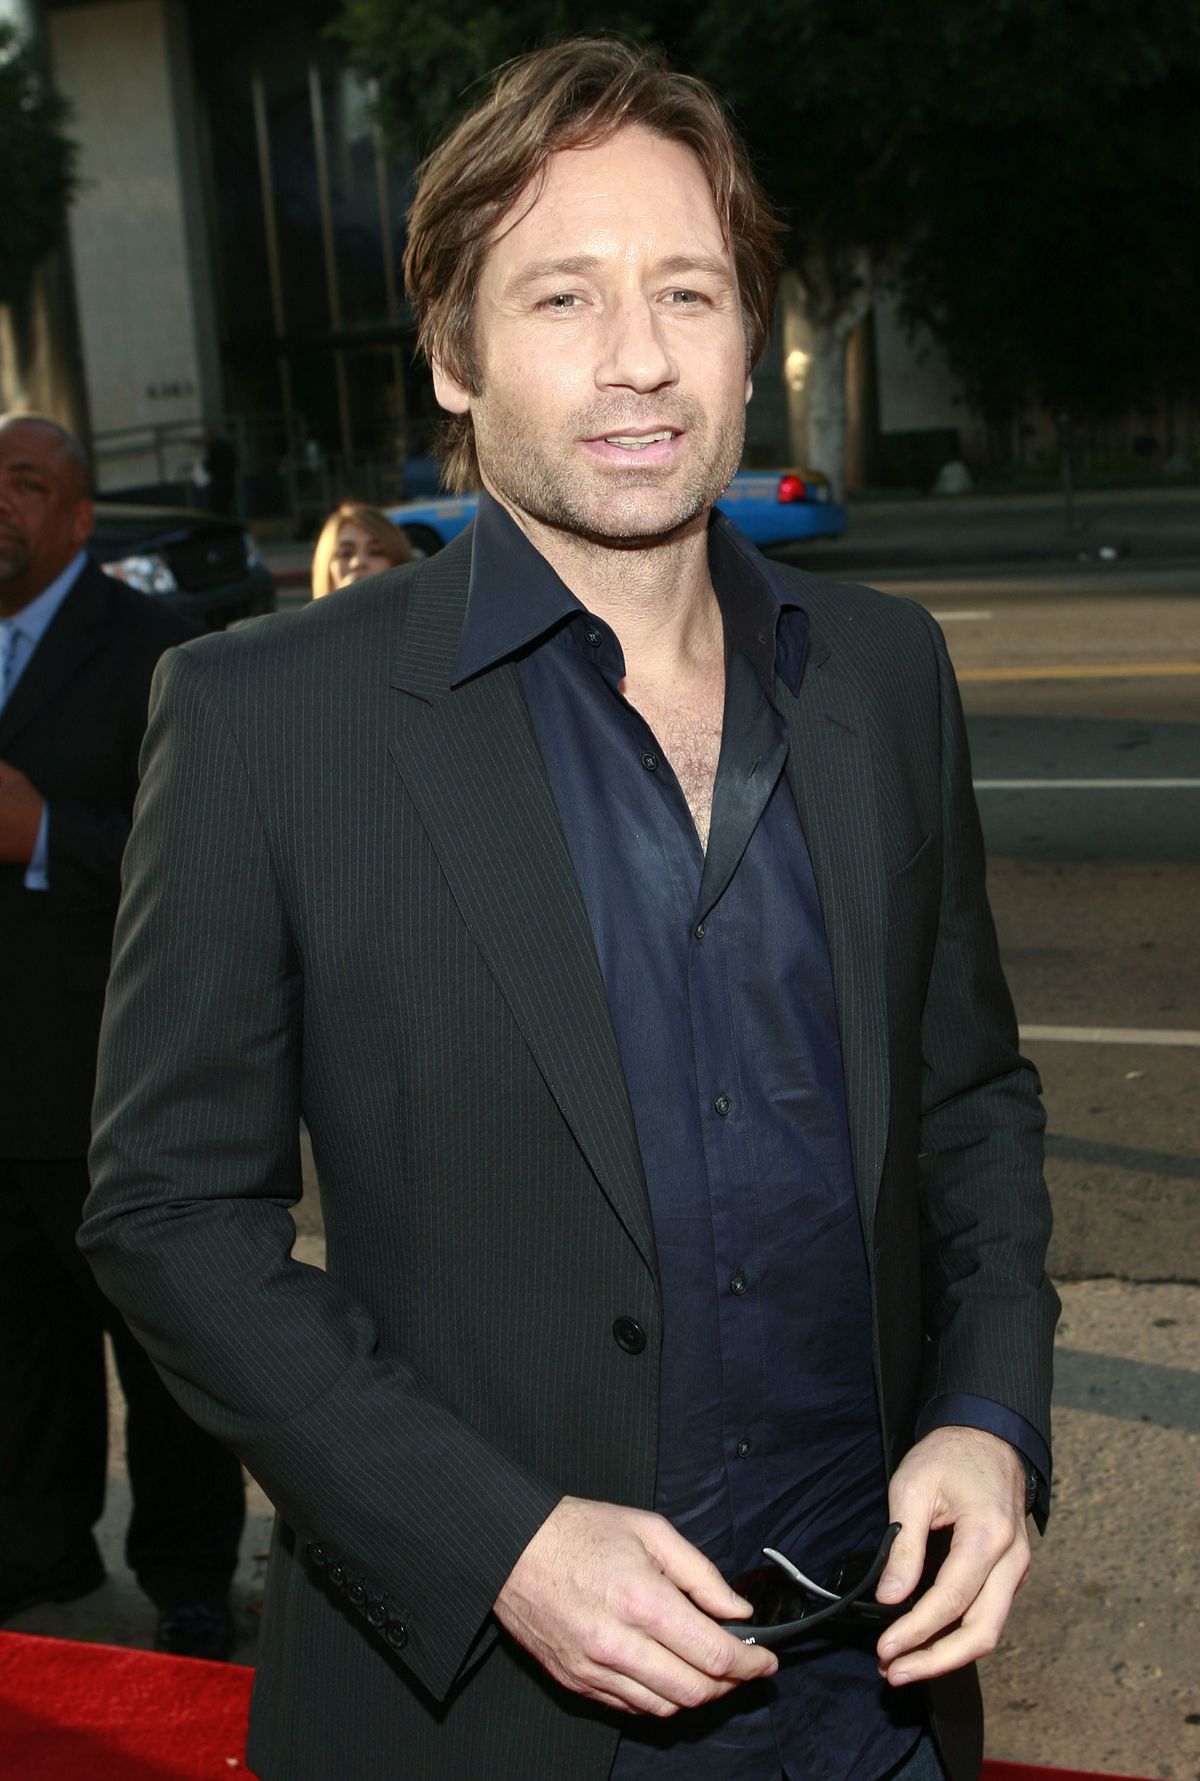 Duchovny